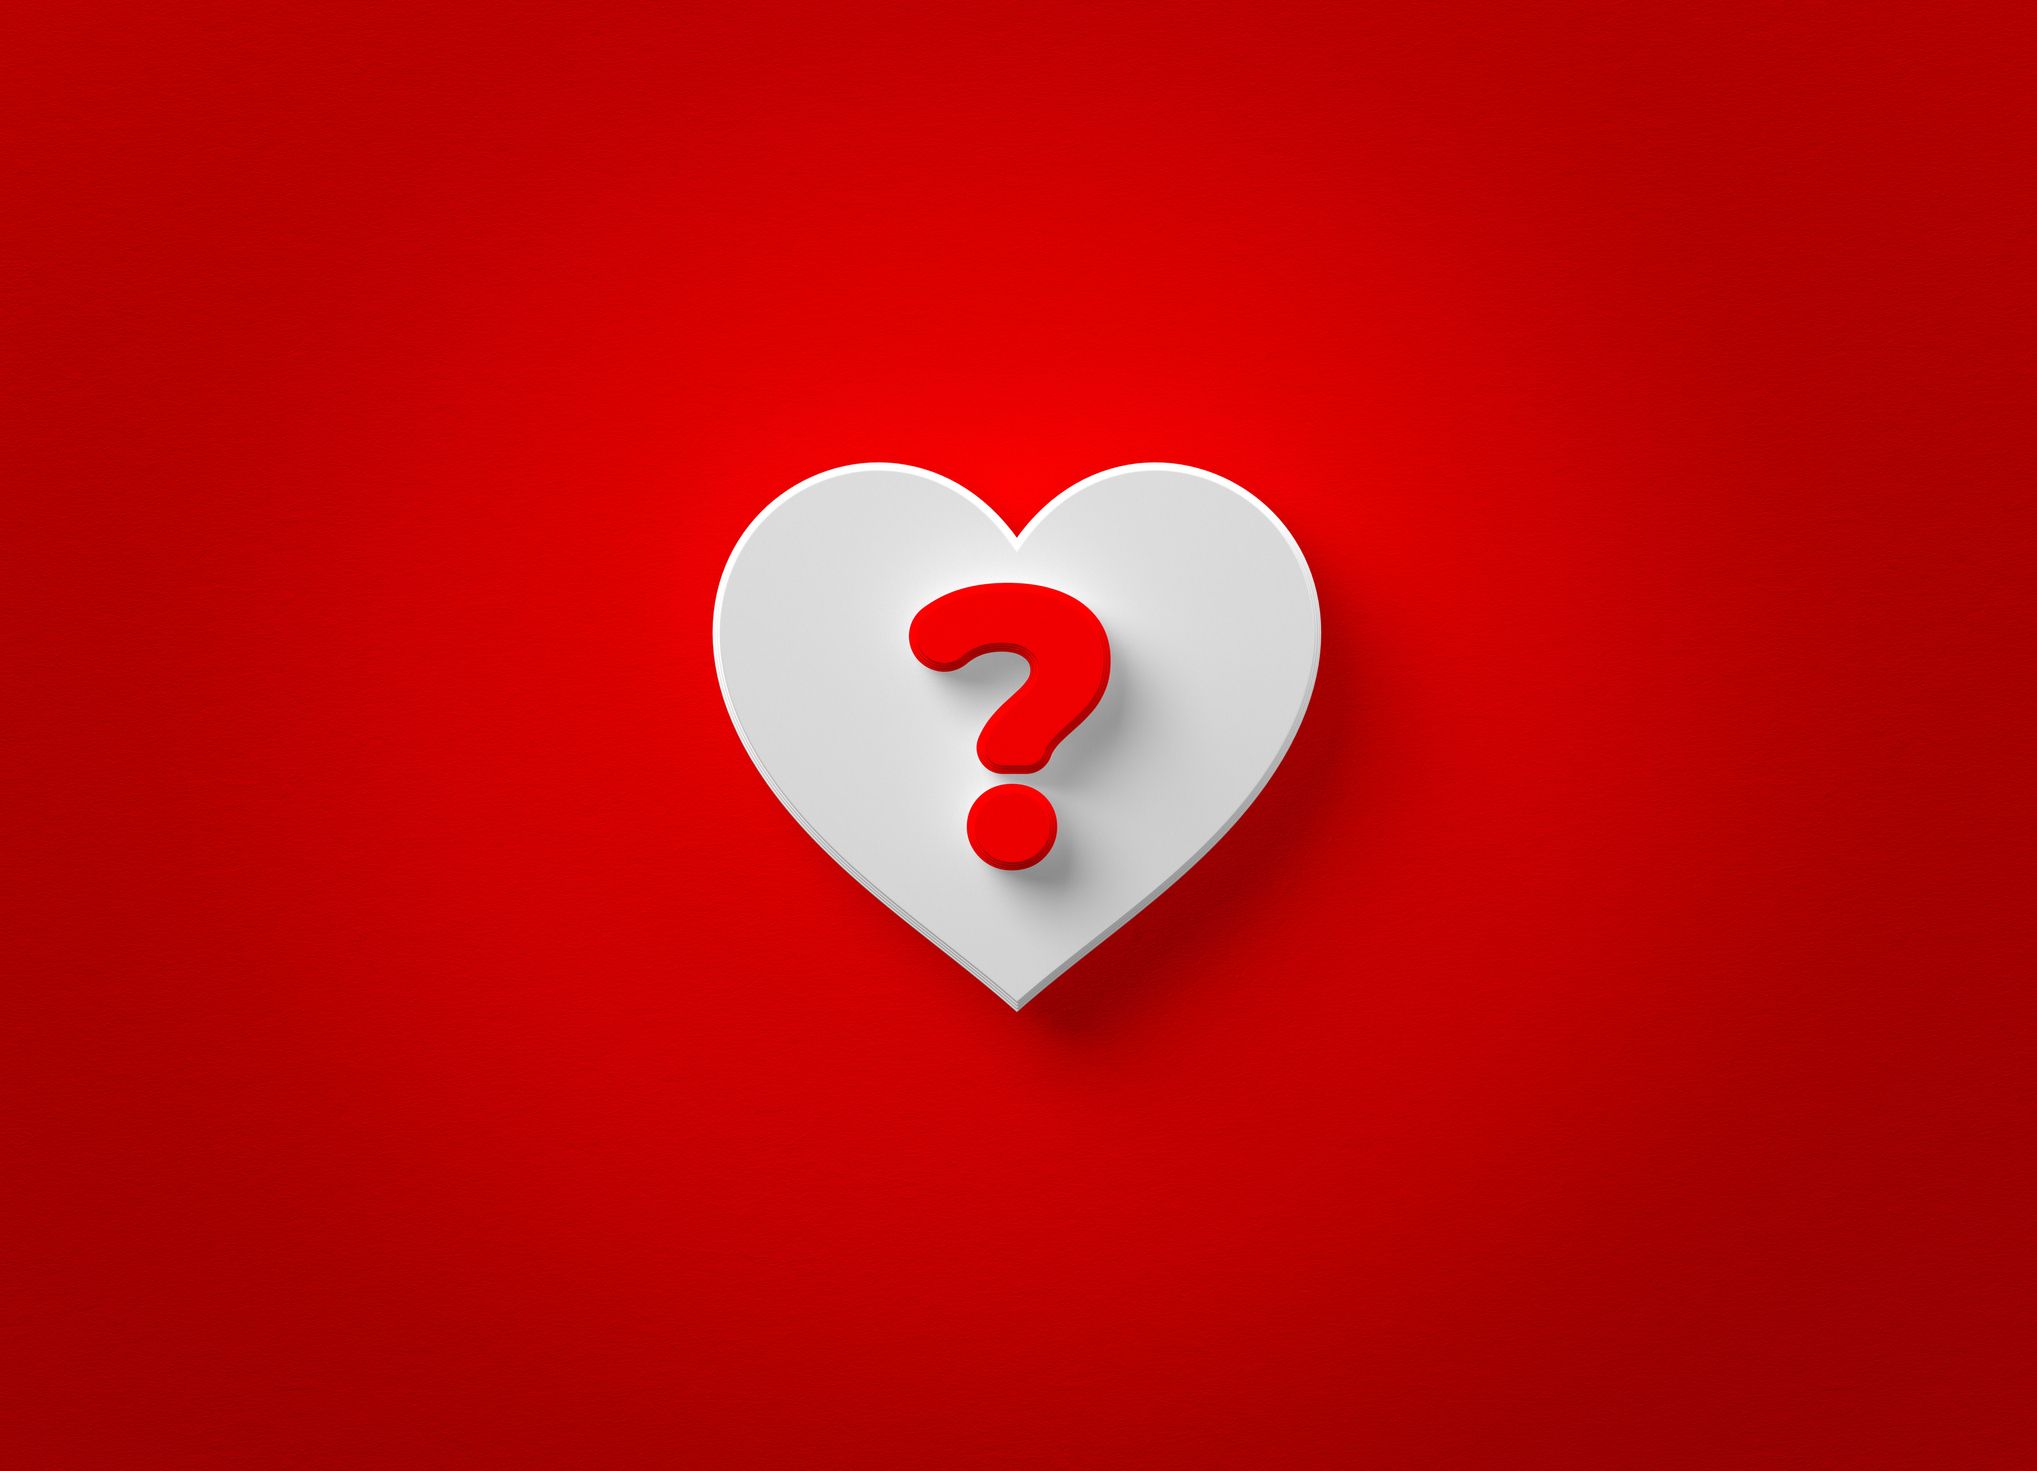 https://hips.hearstapps.com/hmg-prod/images/white-color-heart-shape-and-red-color-question-mark-royalty-free-image-1680052362.jpg